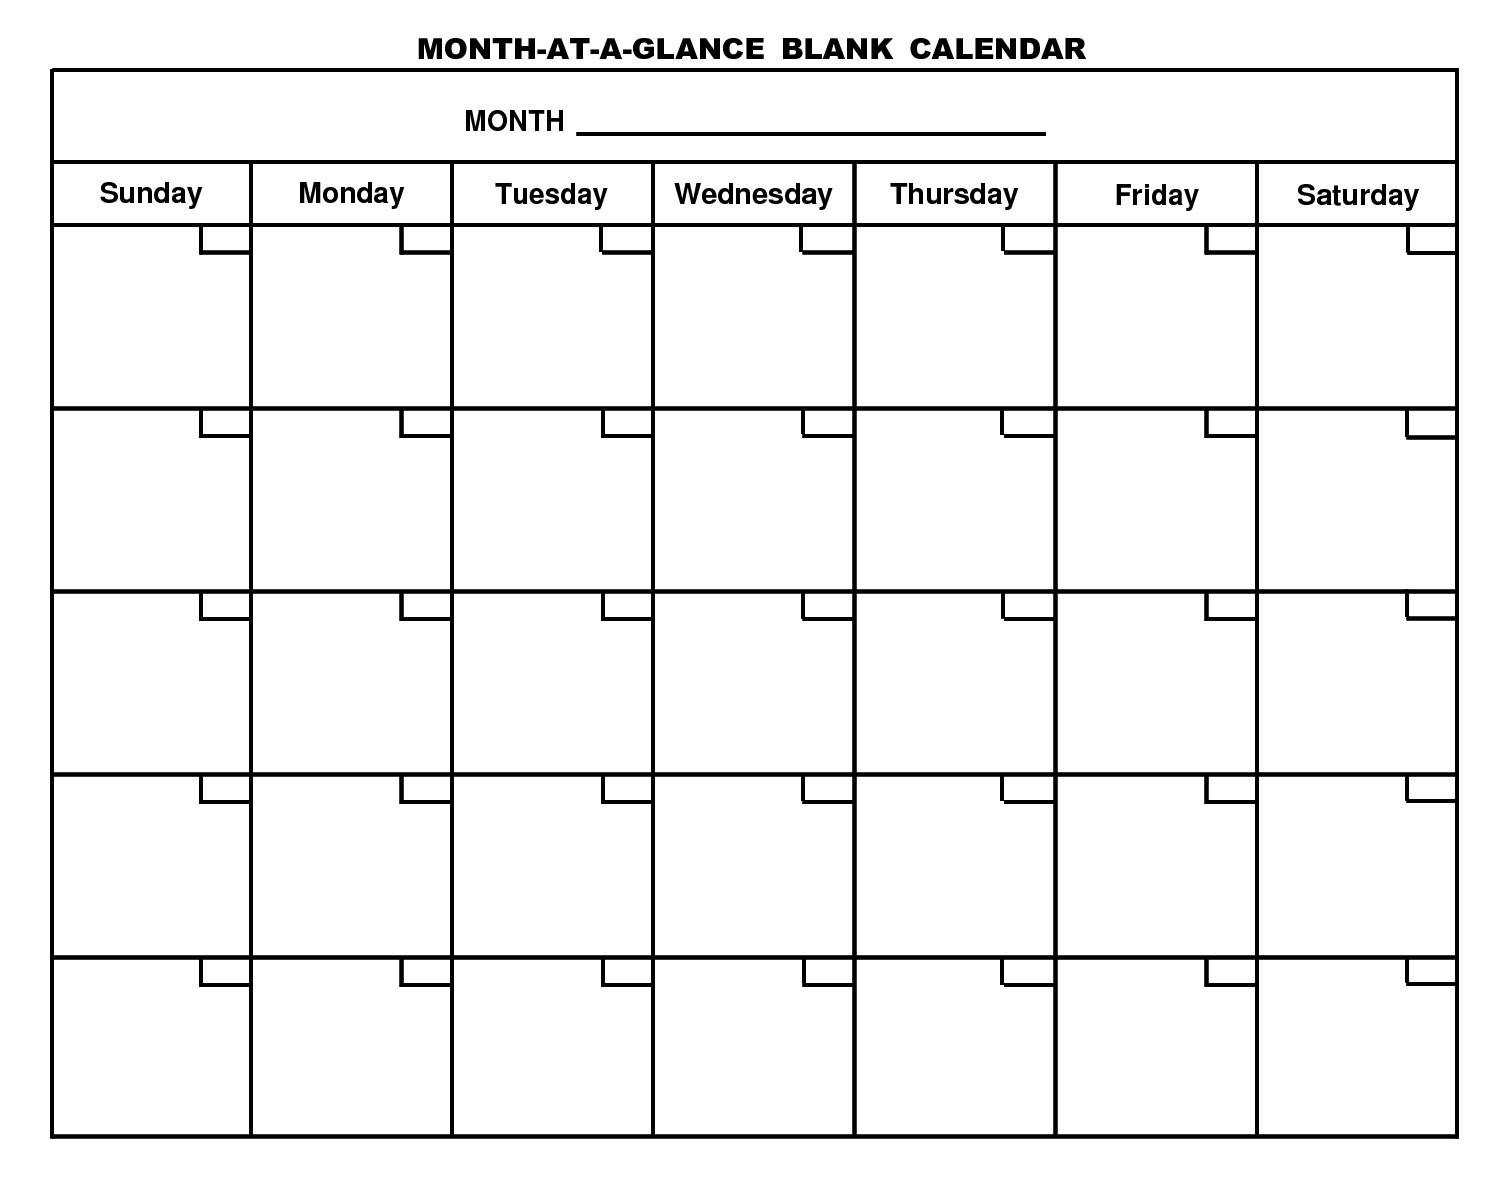 Month At A Glance Blank Calendar Template - Dalep.midnightpig.co For Month At A Glance Blank Calendar Template